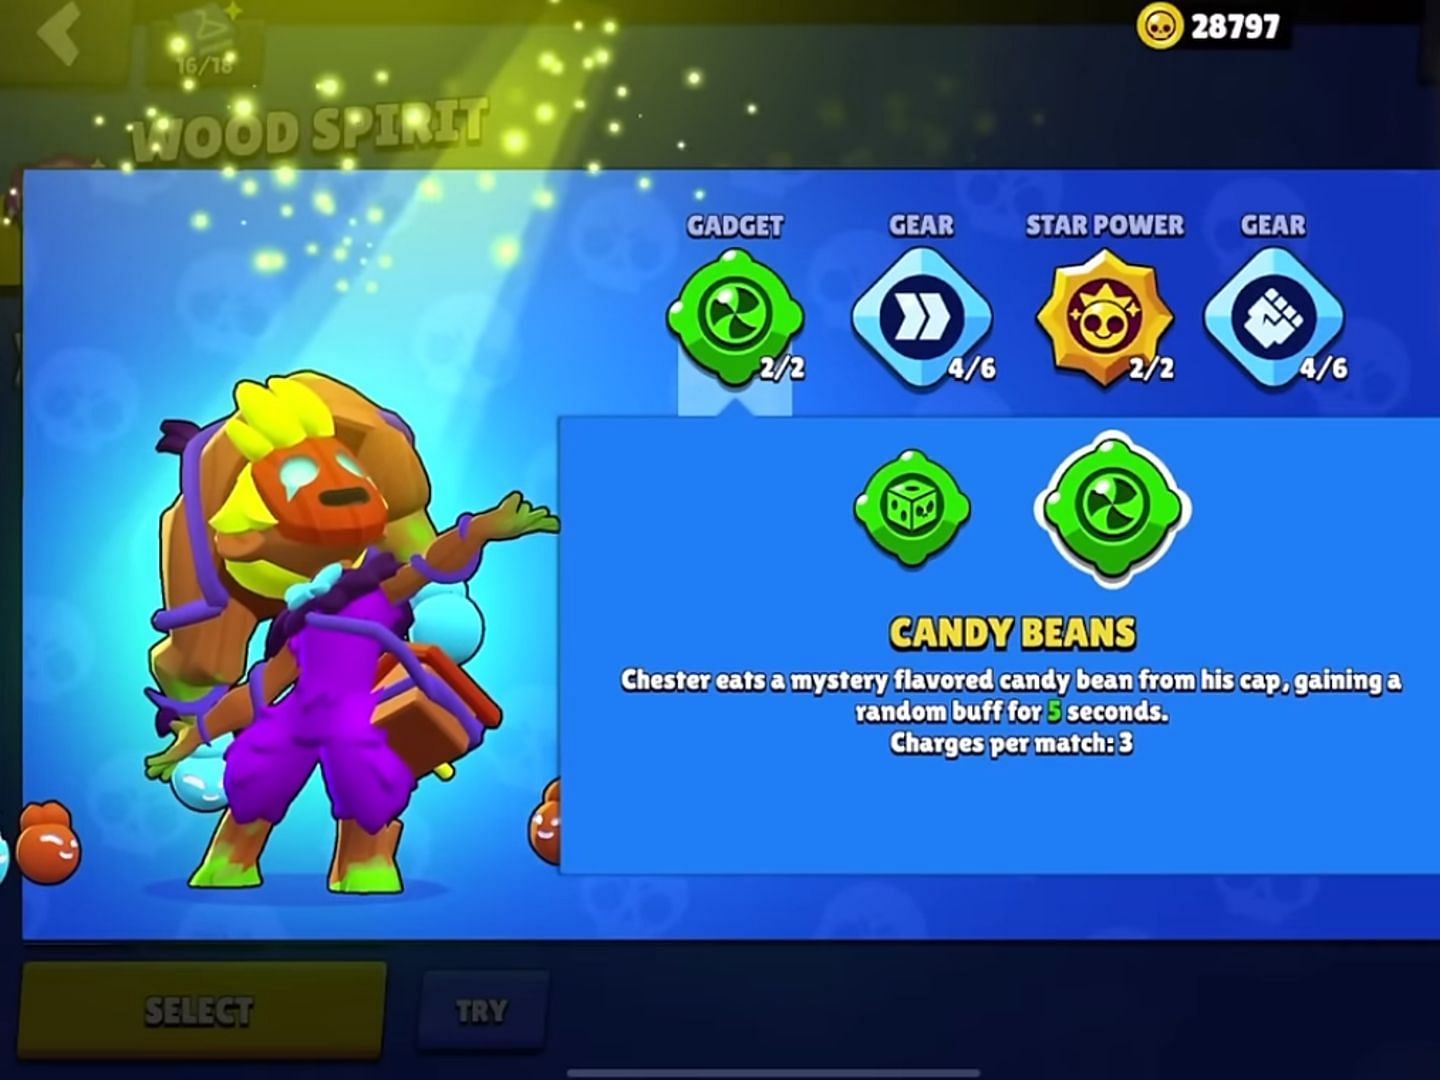 Candy Beans Gadget (Image via Supercell)